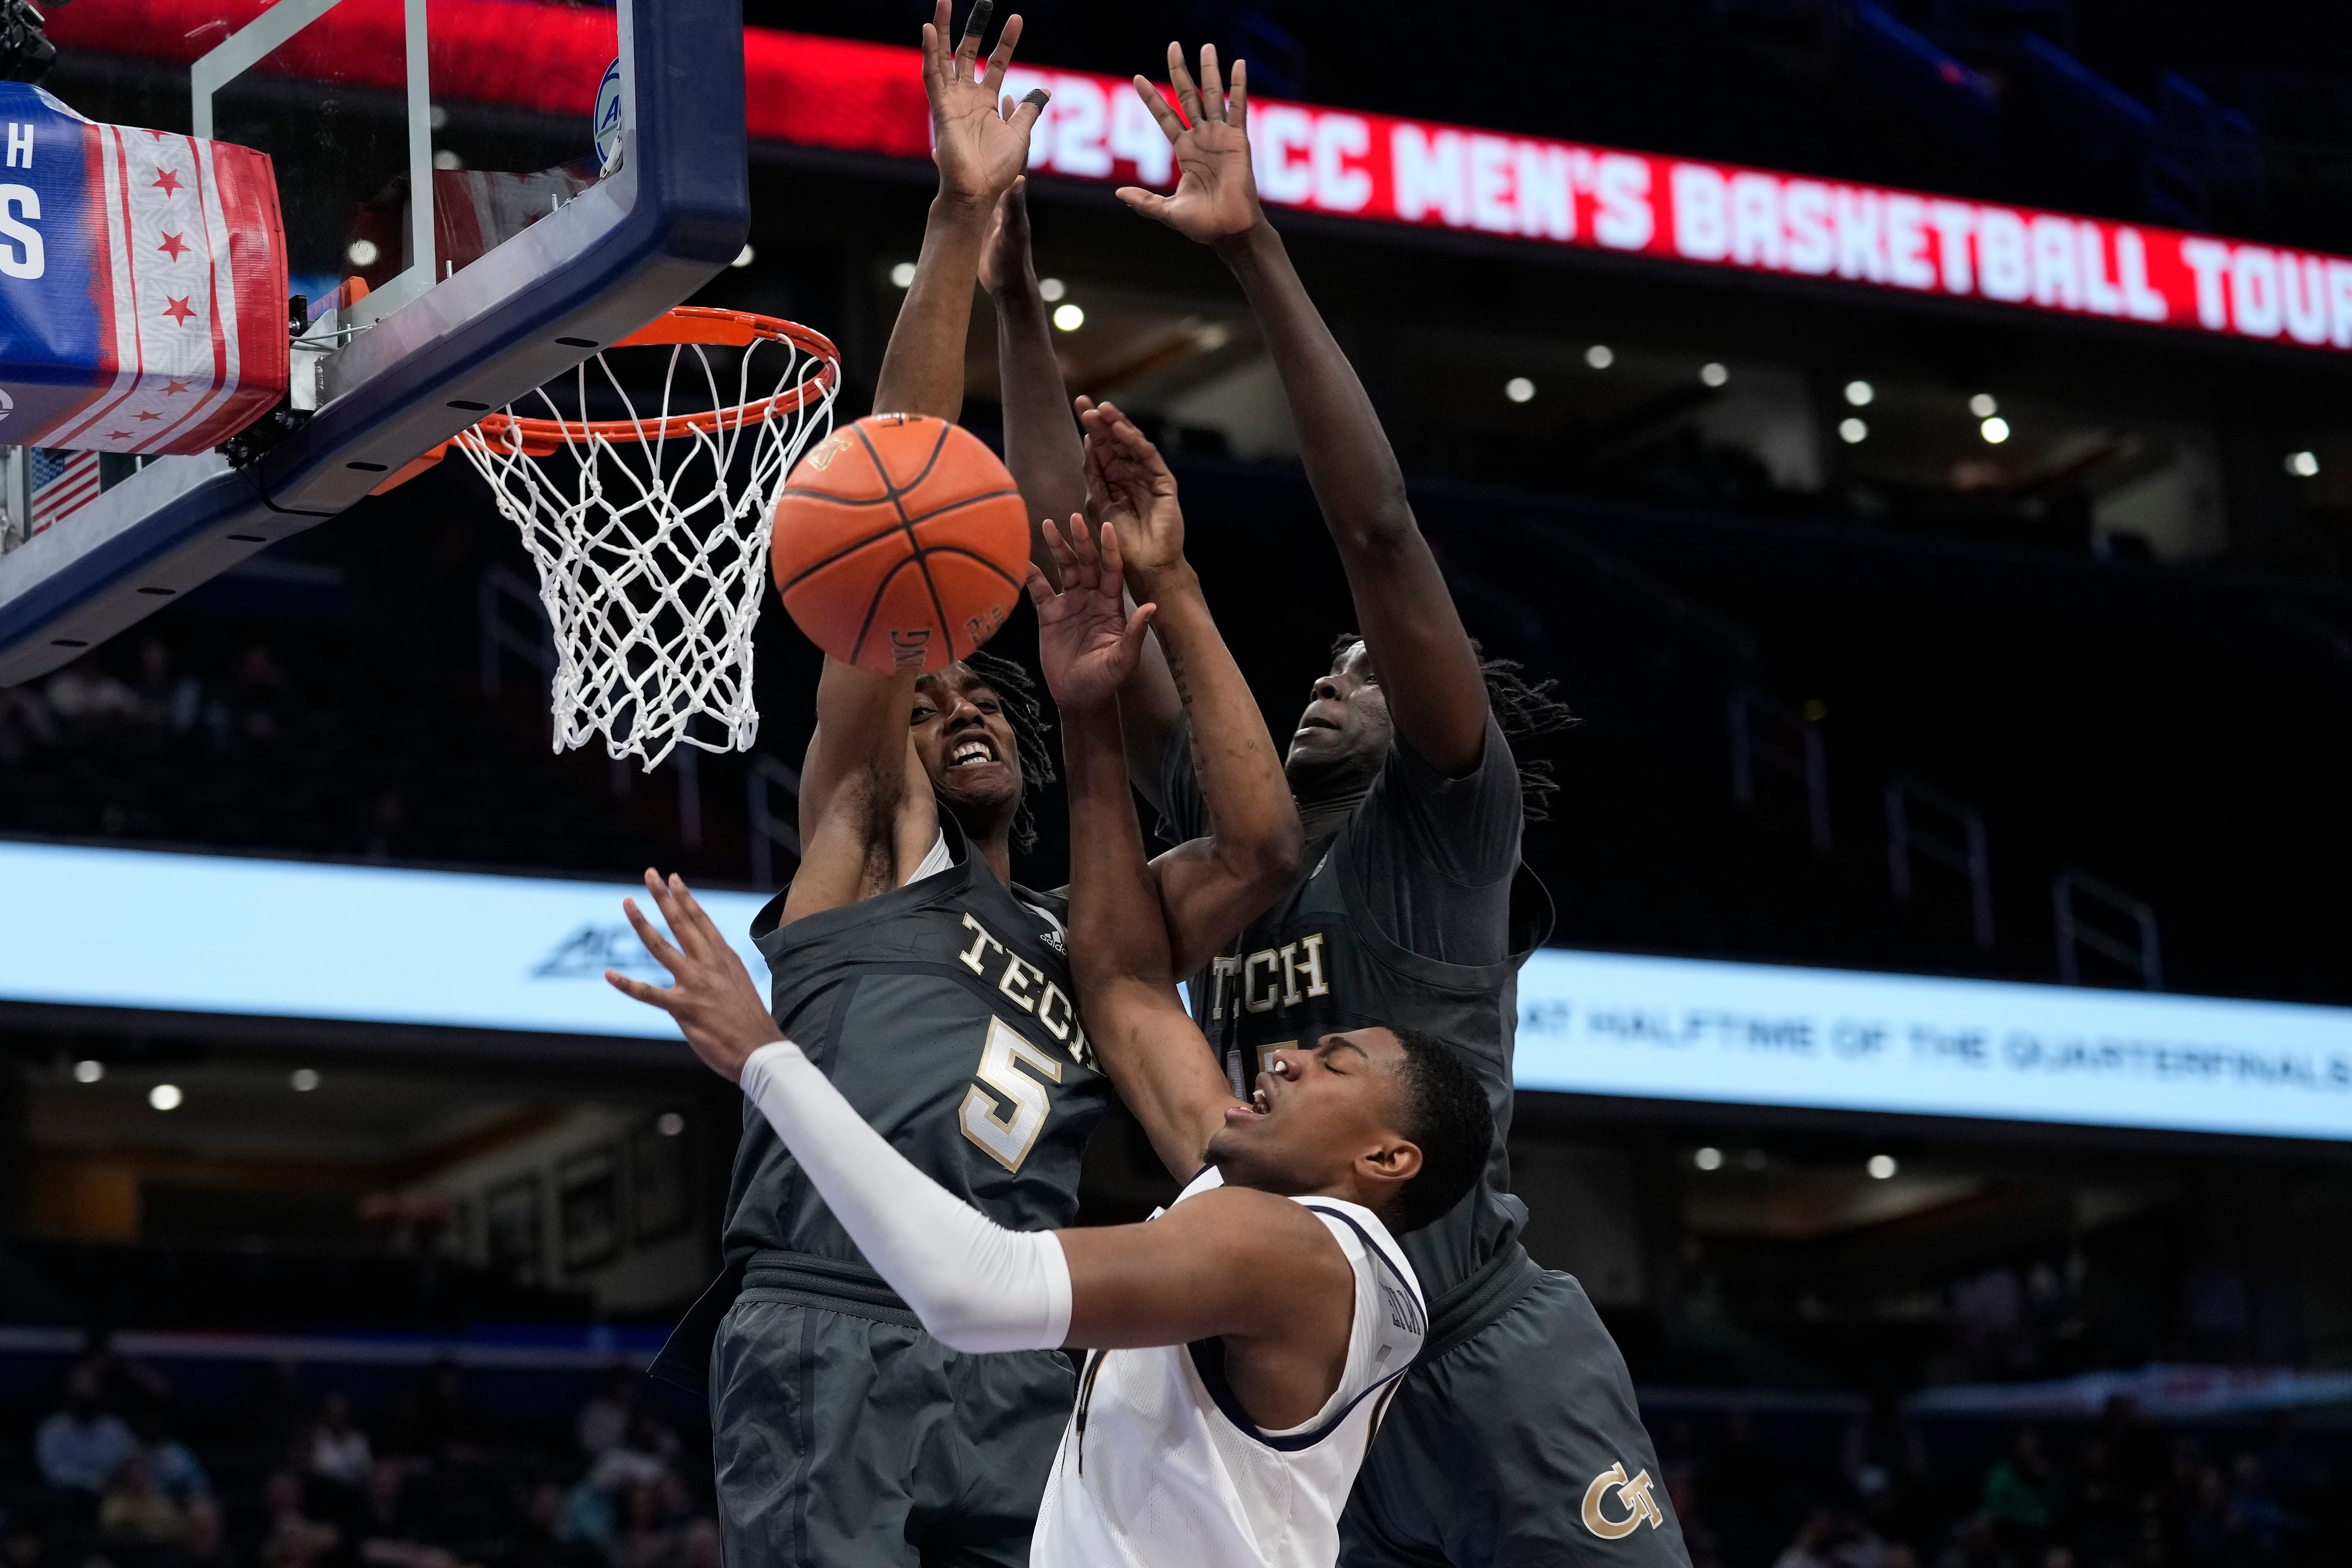 Notre Dame forward Kebba Njie (14) is blocked under the basket by Georgia Tech forwards Tafara Gapare (5) and Baye Ndongo (11) during the first half of the Atlantic Coast Conference NCAA college basketball tournament, Tuesday, March 12, 2024, in Washington. (AP Photo/Susan Walsh)